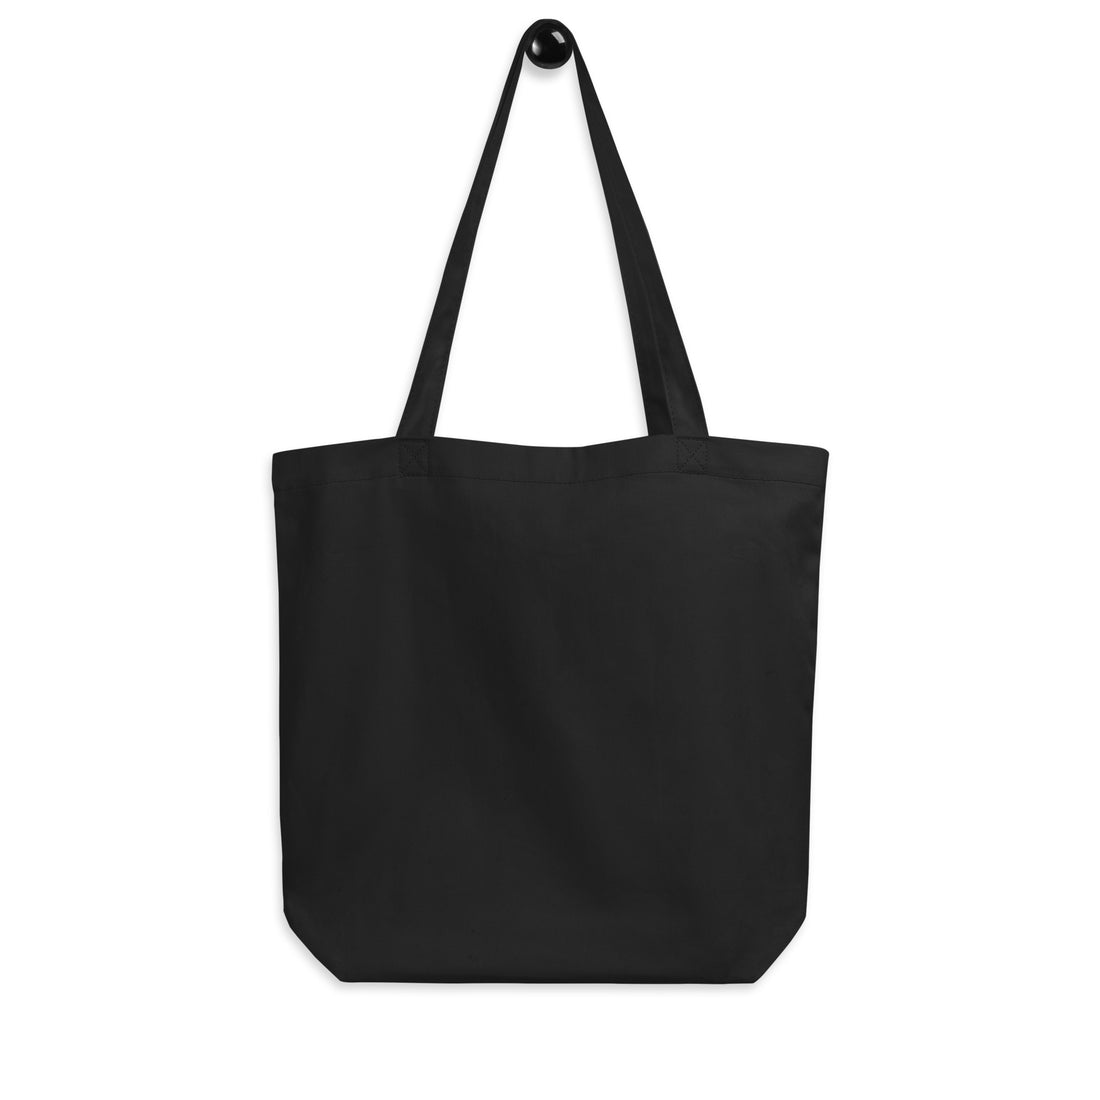 Beauty Girl Graphic Tote Bag